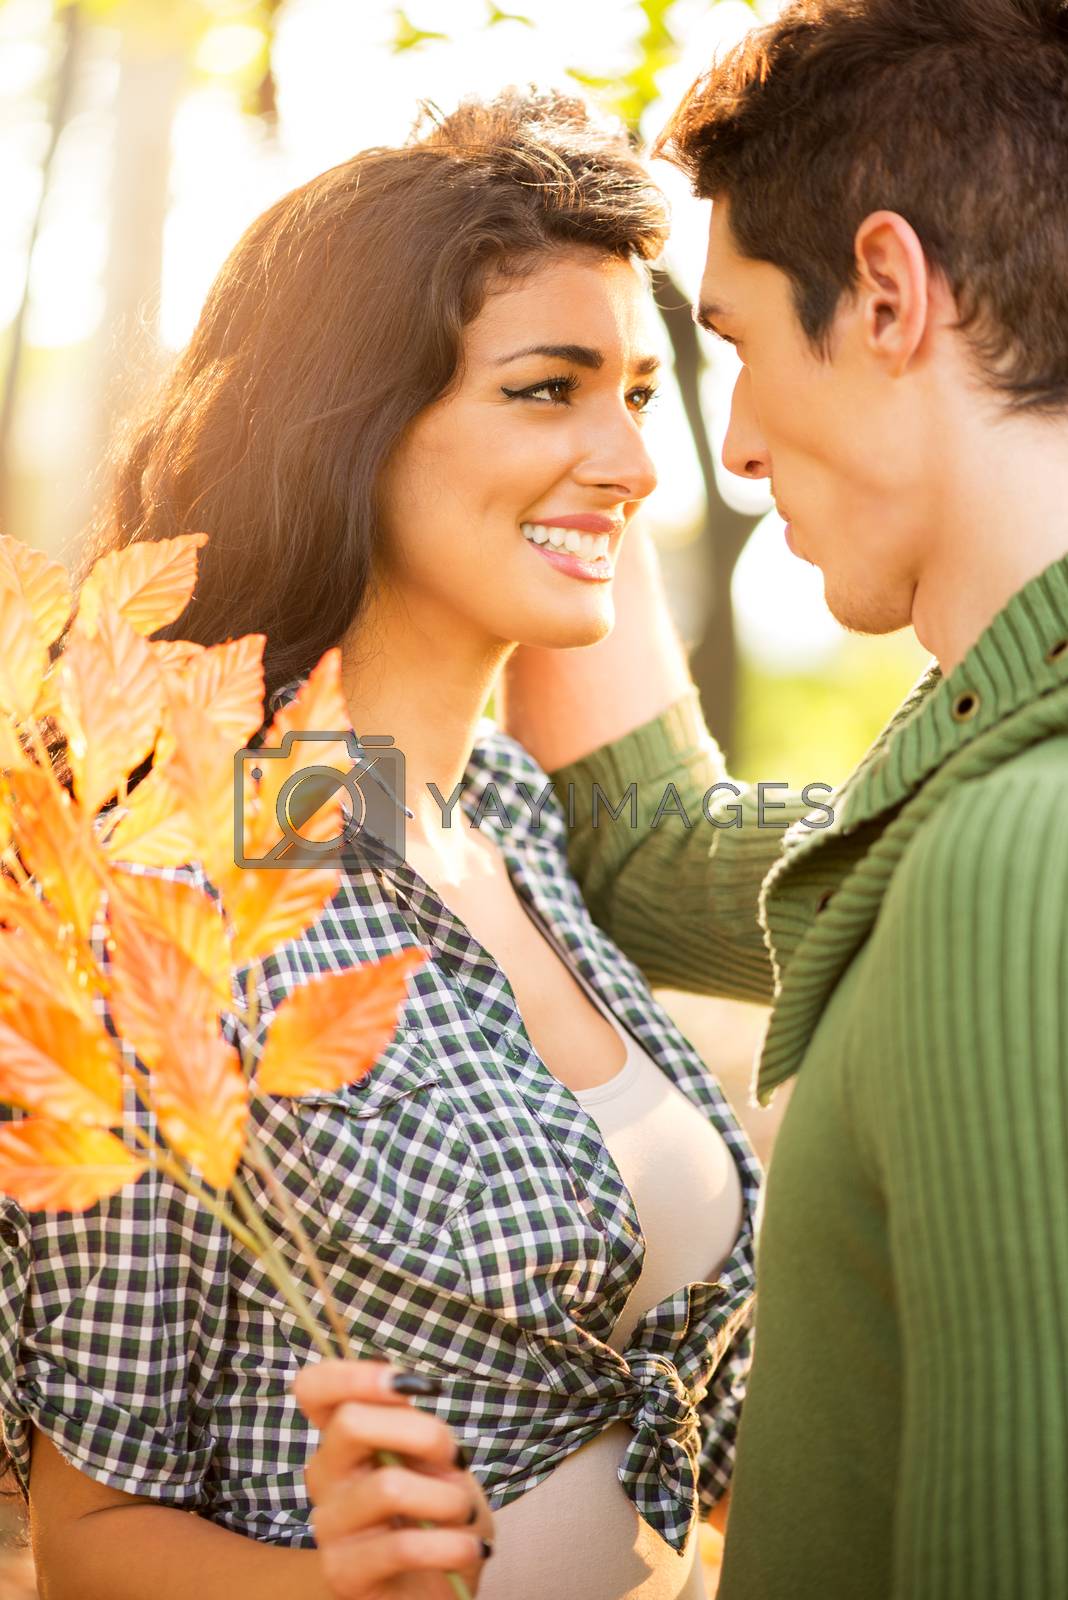 Smiling pretty girl in the park is holding a sprig of autumn leaves and looking lovingly at her boyfriend.